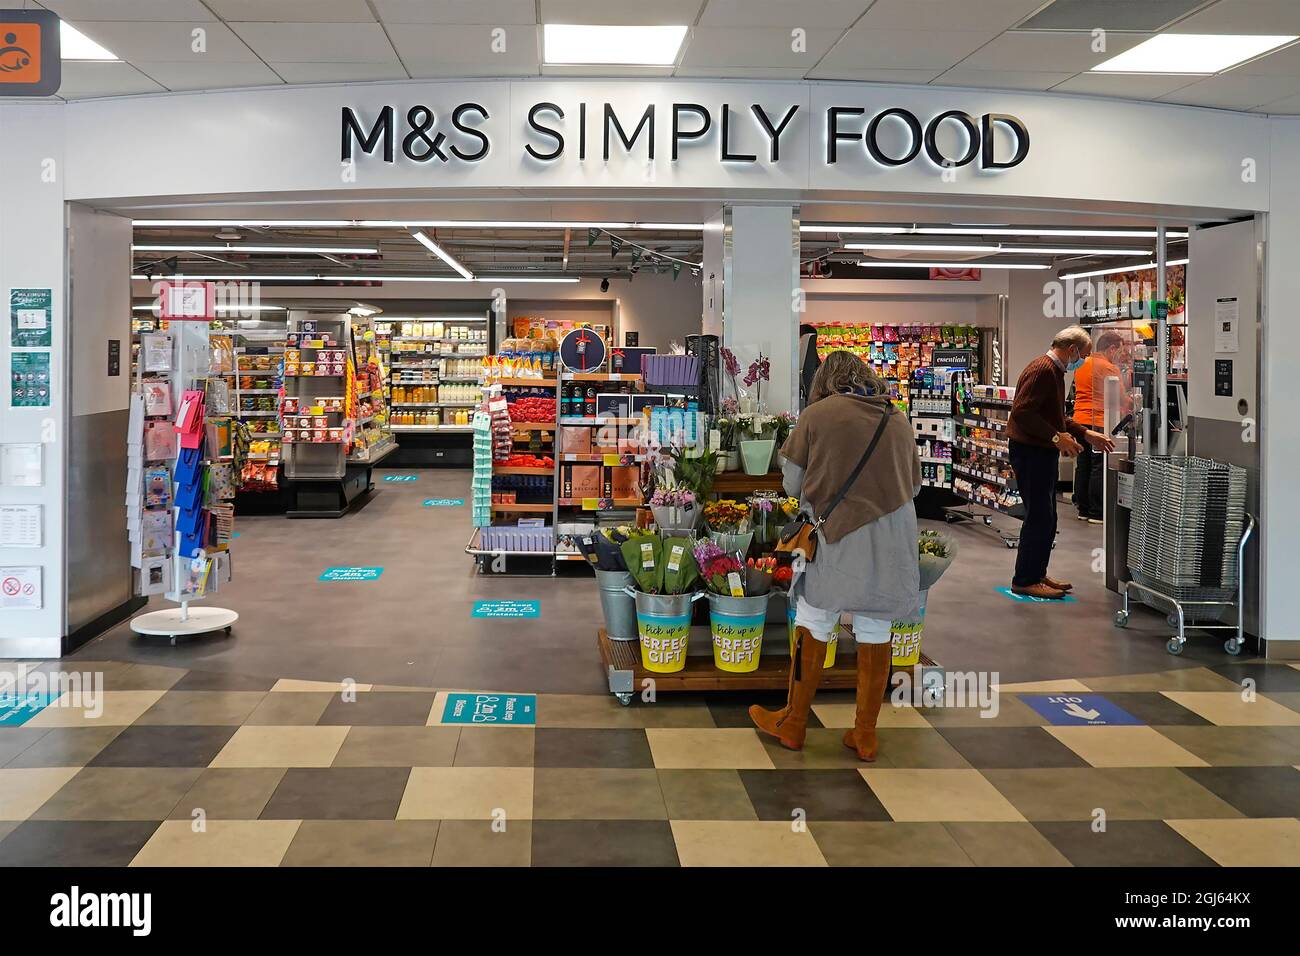 Marks & Spencer sign Simply Food shop a retail business in M5 motorway services shopping mall shoppers in Covid face masks West Midlands England UK Stock Photo